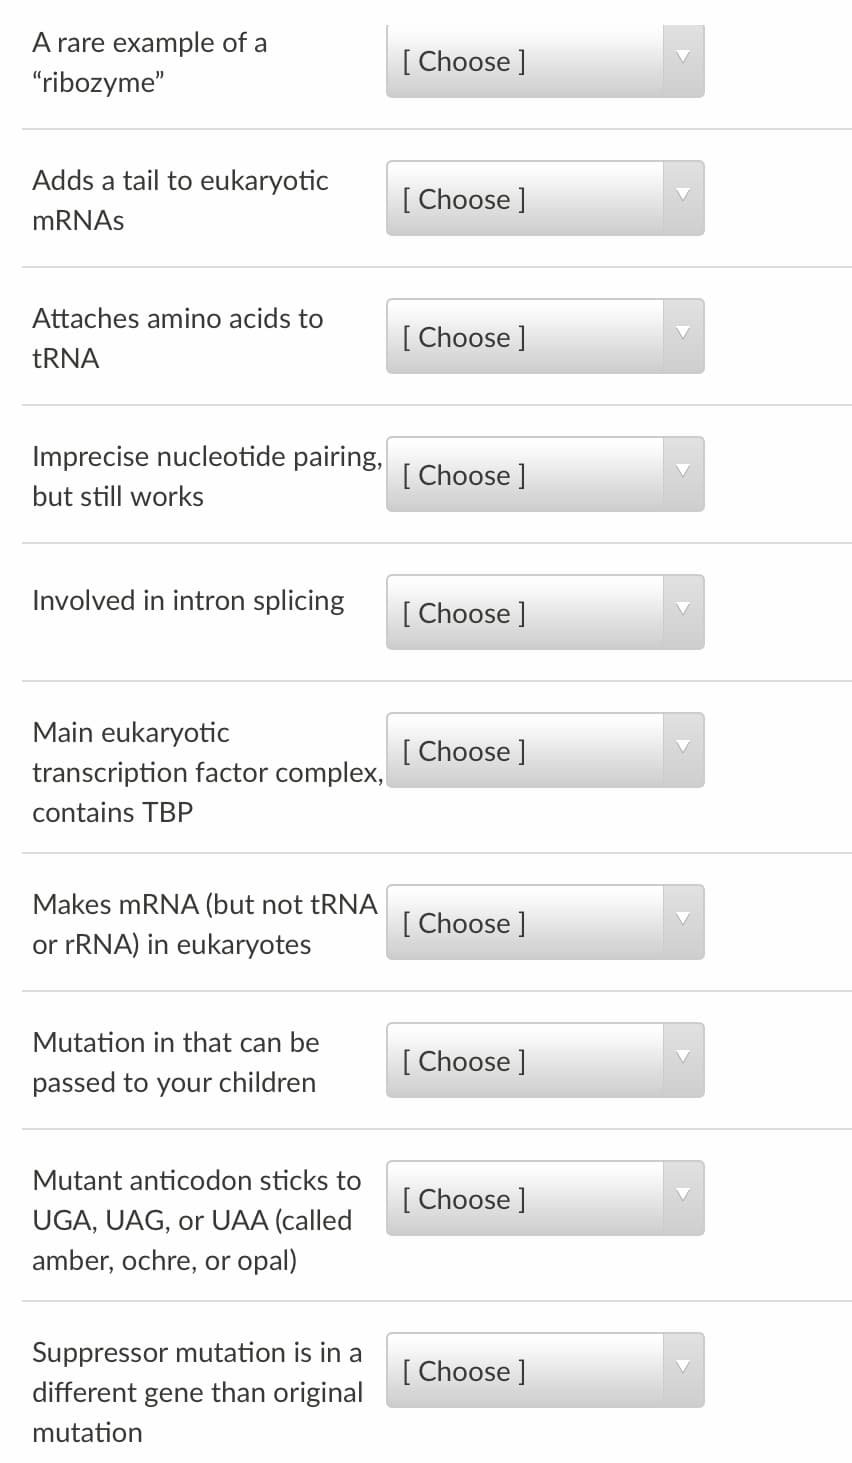 A rare example of a
[ Choose ]
"ribozyme"
Adds a tail to eukaryotic
[ Choose ]
MRNAS
Attaches amino acids to
[ Choose ]
TRNA
Imprecise nucleotide pairing,
[ Choose ]
but still works
Involved in intron splicing
[ Choose ]
Main eukaryotic
[ Choose ]
transcription factor complex,
contains TBP
Makes mRNA (but not tRNA
[ Choose ]
or FRNA) in eukaryotes
Mutation in that can be
[ Choose ]
passed to your children
Mutant anticodon sticks to
[ Choose ]
UGA, UAG, or UAA (called
amber, ochre, or opal)
Suppressor mutation is in a
[ Choose ]
different gene than original
mutation
